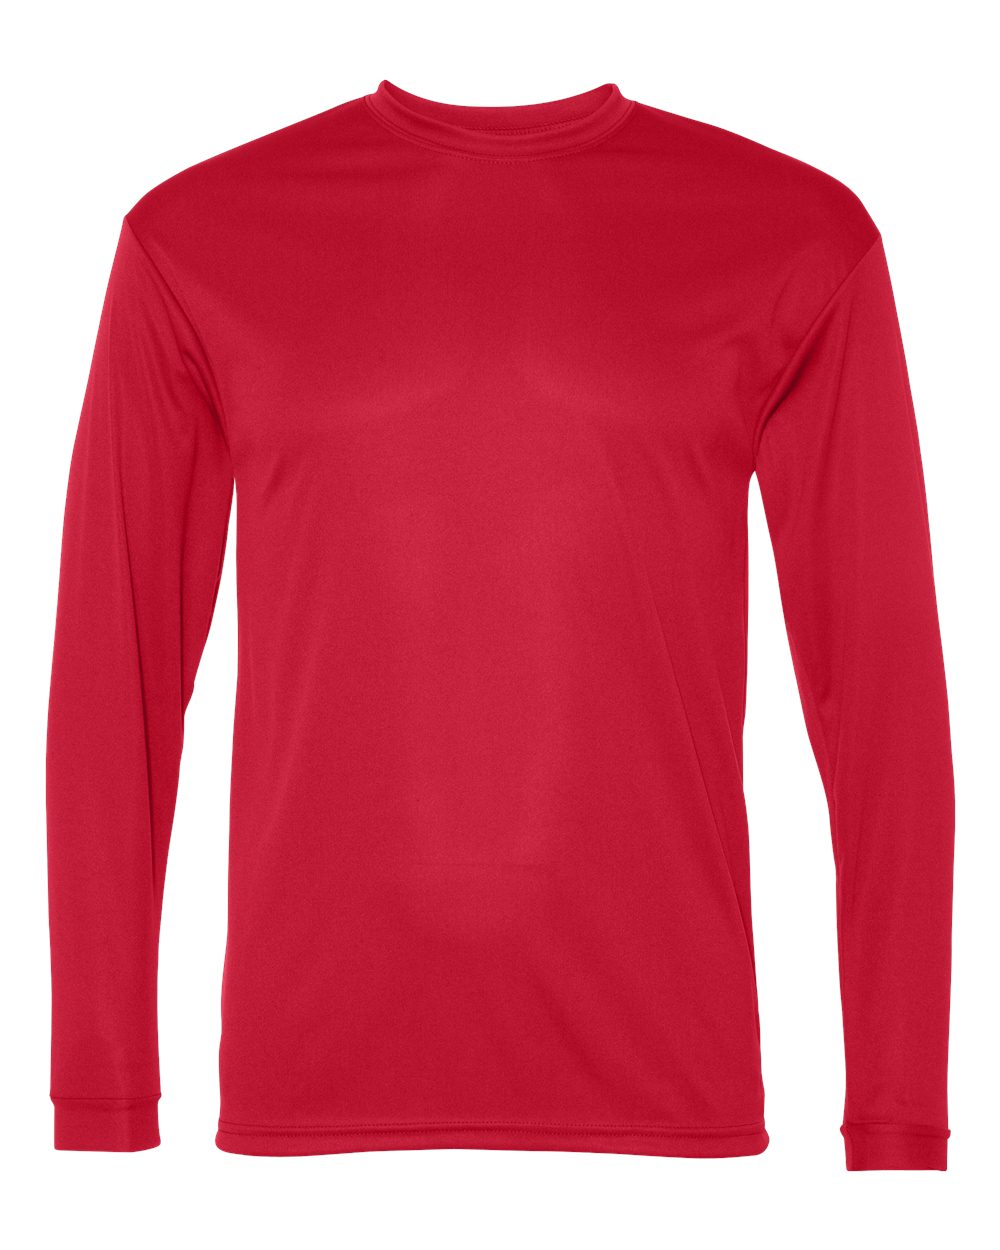 C2 Sport 5104 Adult Performance Long-Sleeve Tee - Red - 3XL